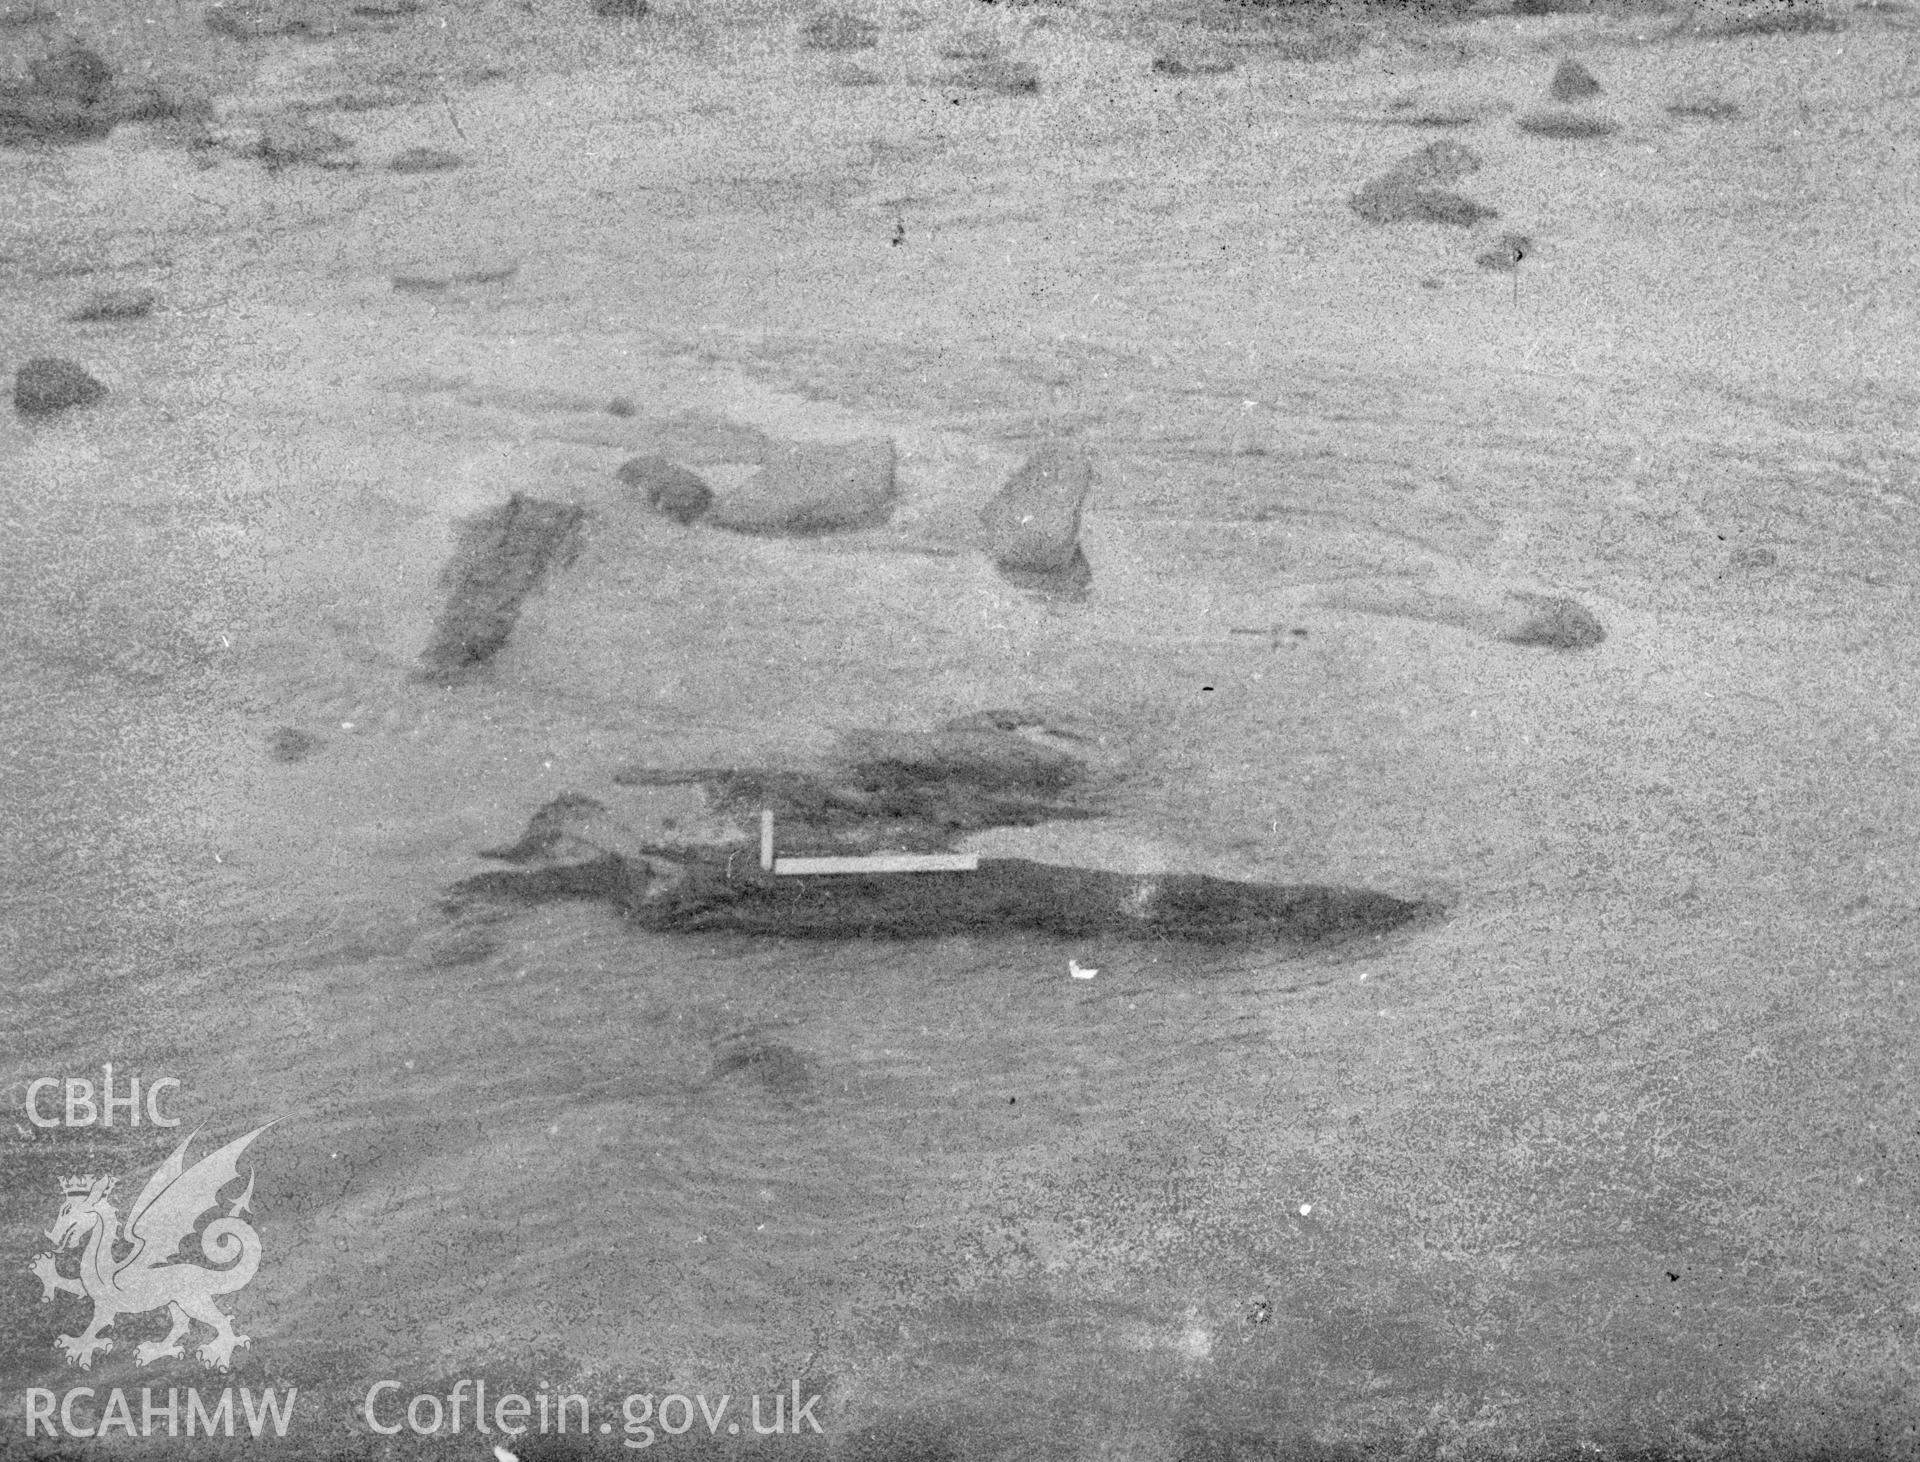 Digital copy of a nitrate negative showing submerged forest at Wiseman's Bridge, Pembrokeshire, taken by H. Collin Bowen c.1967.